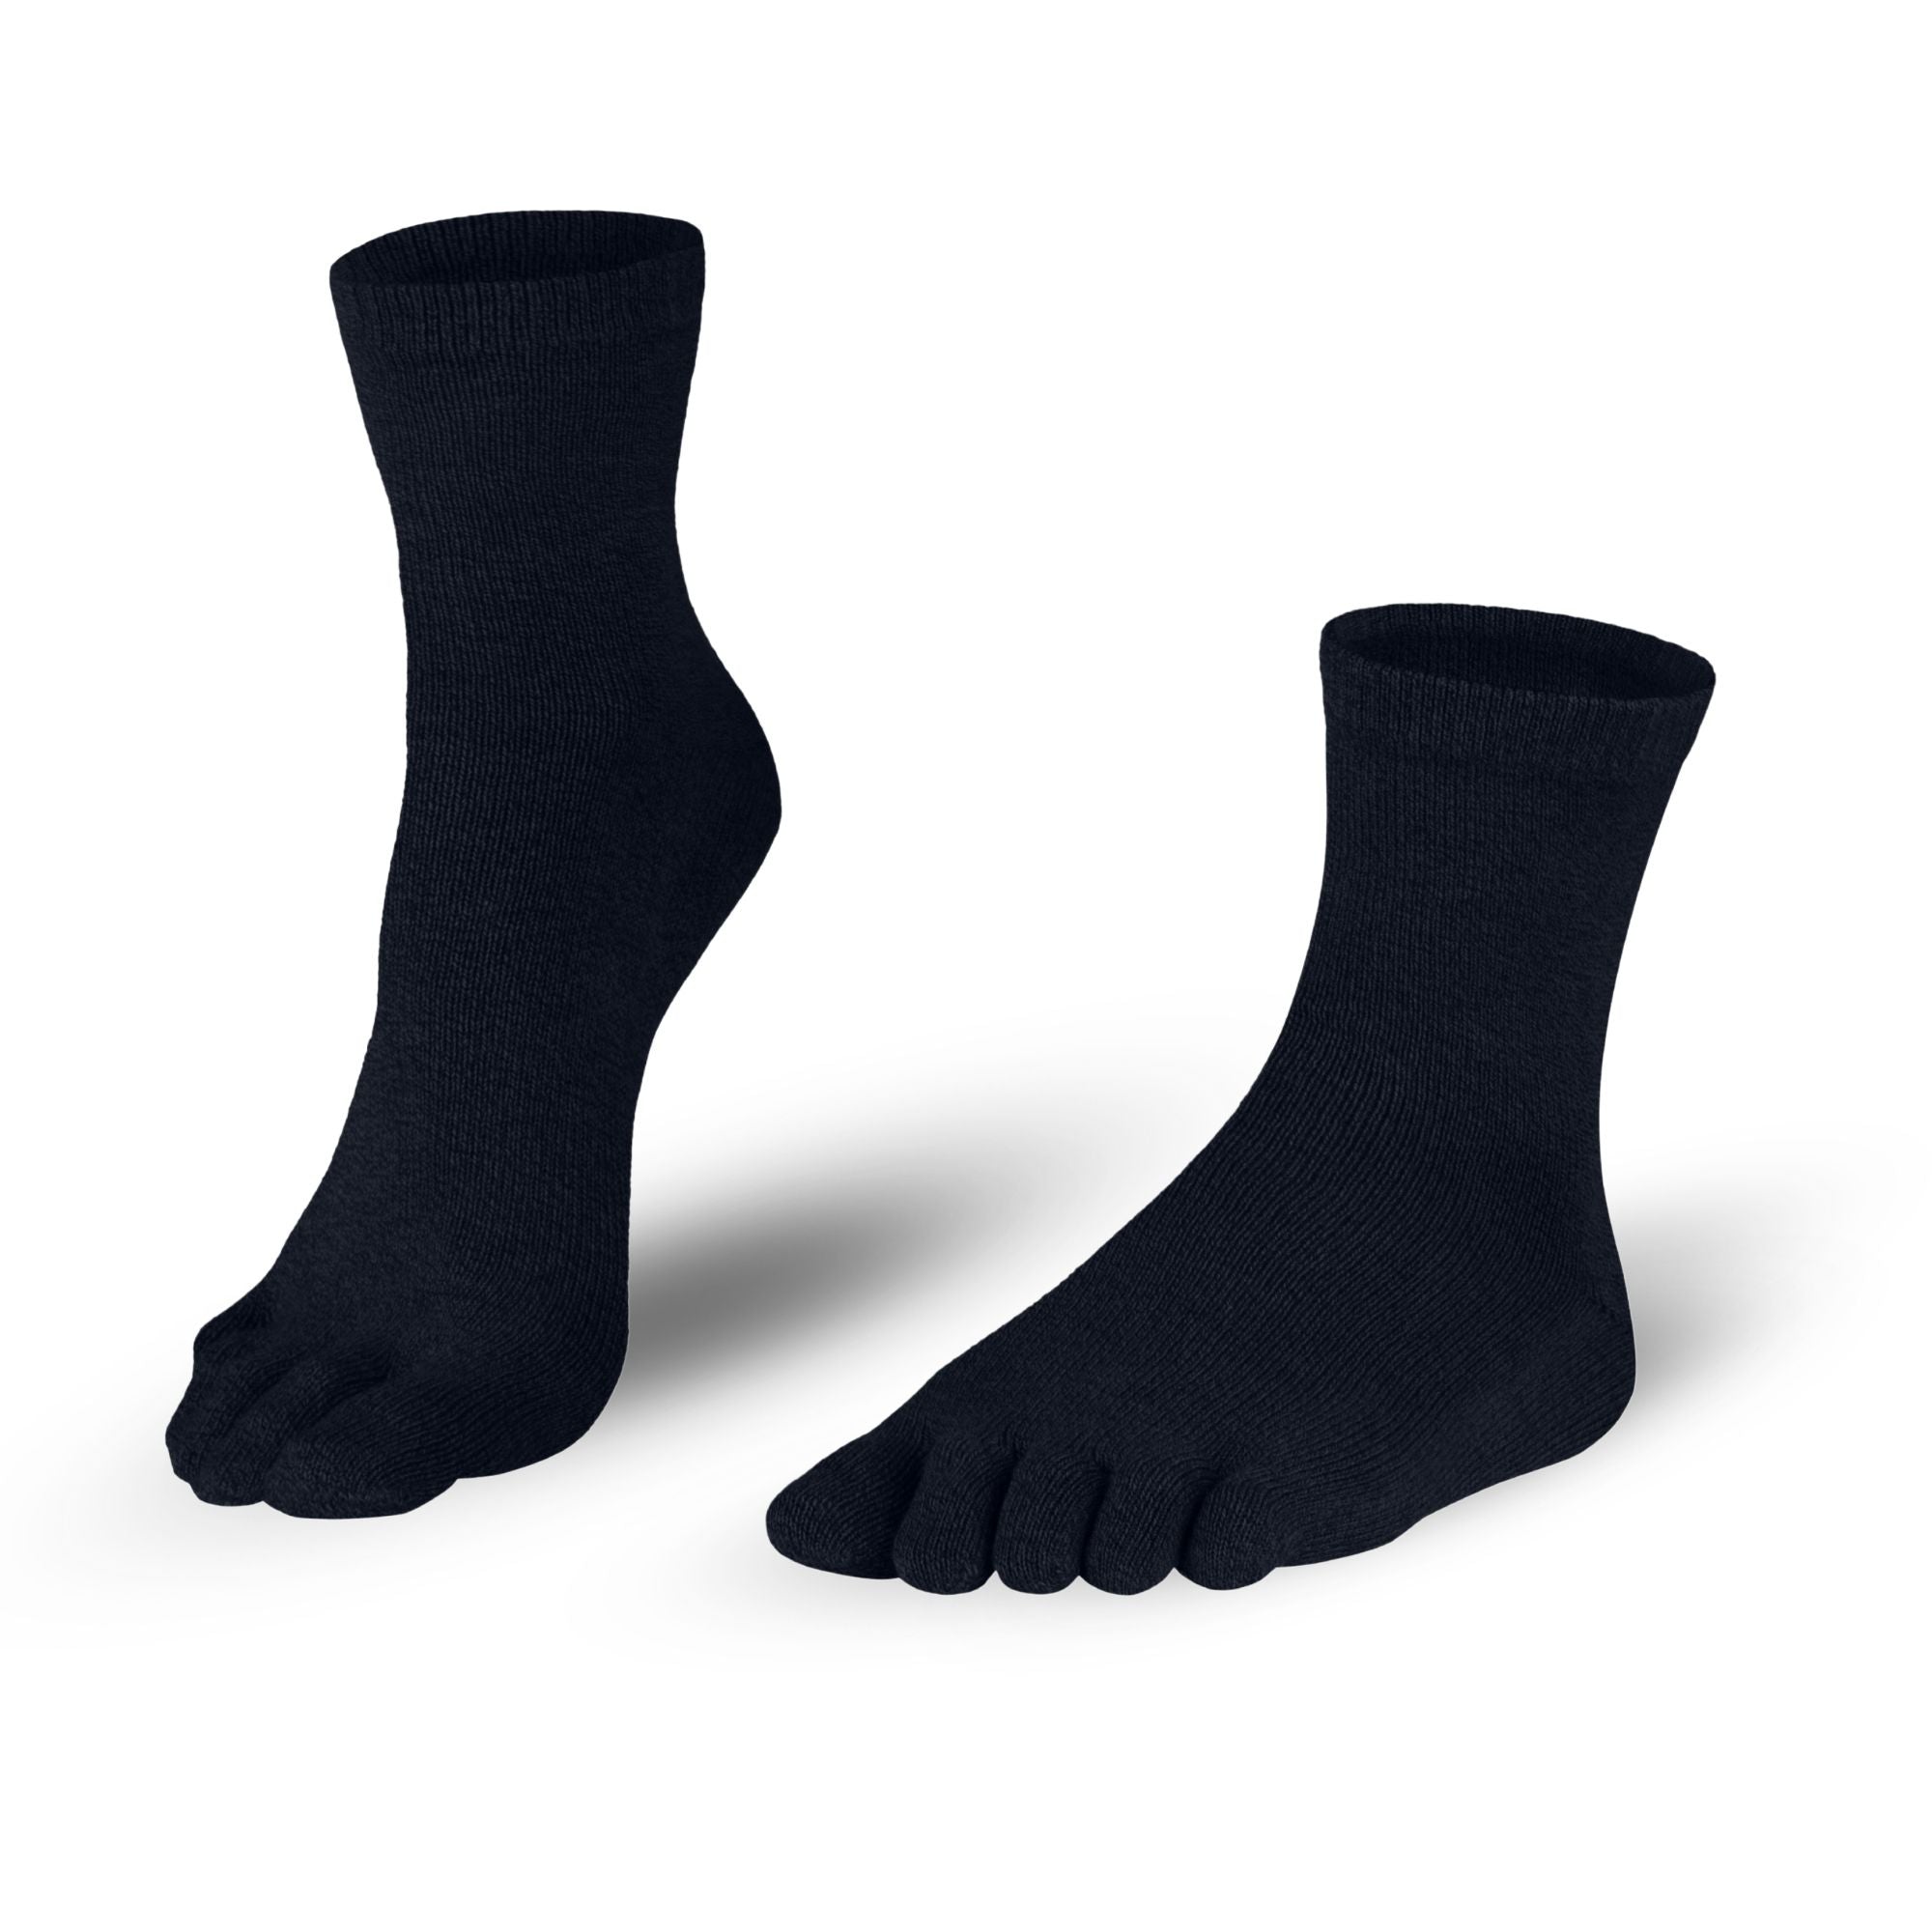 Knitido Silver Protect Midi - short toe socks with antimicrobial silver fiber for men and women.